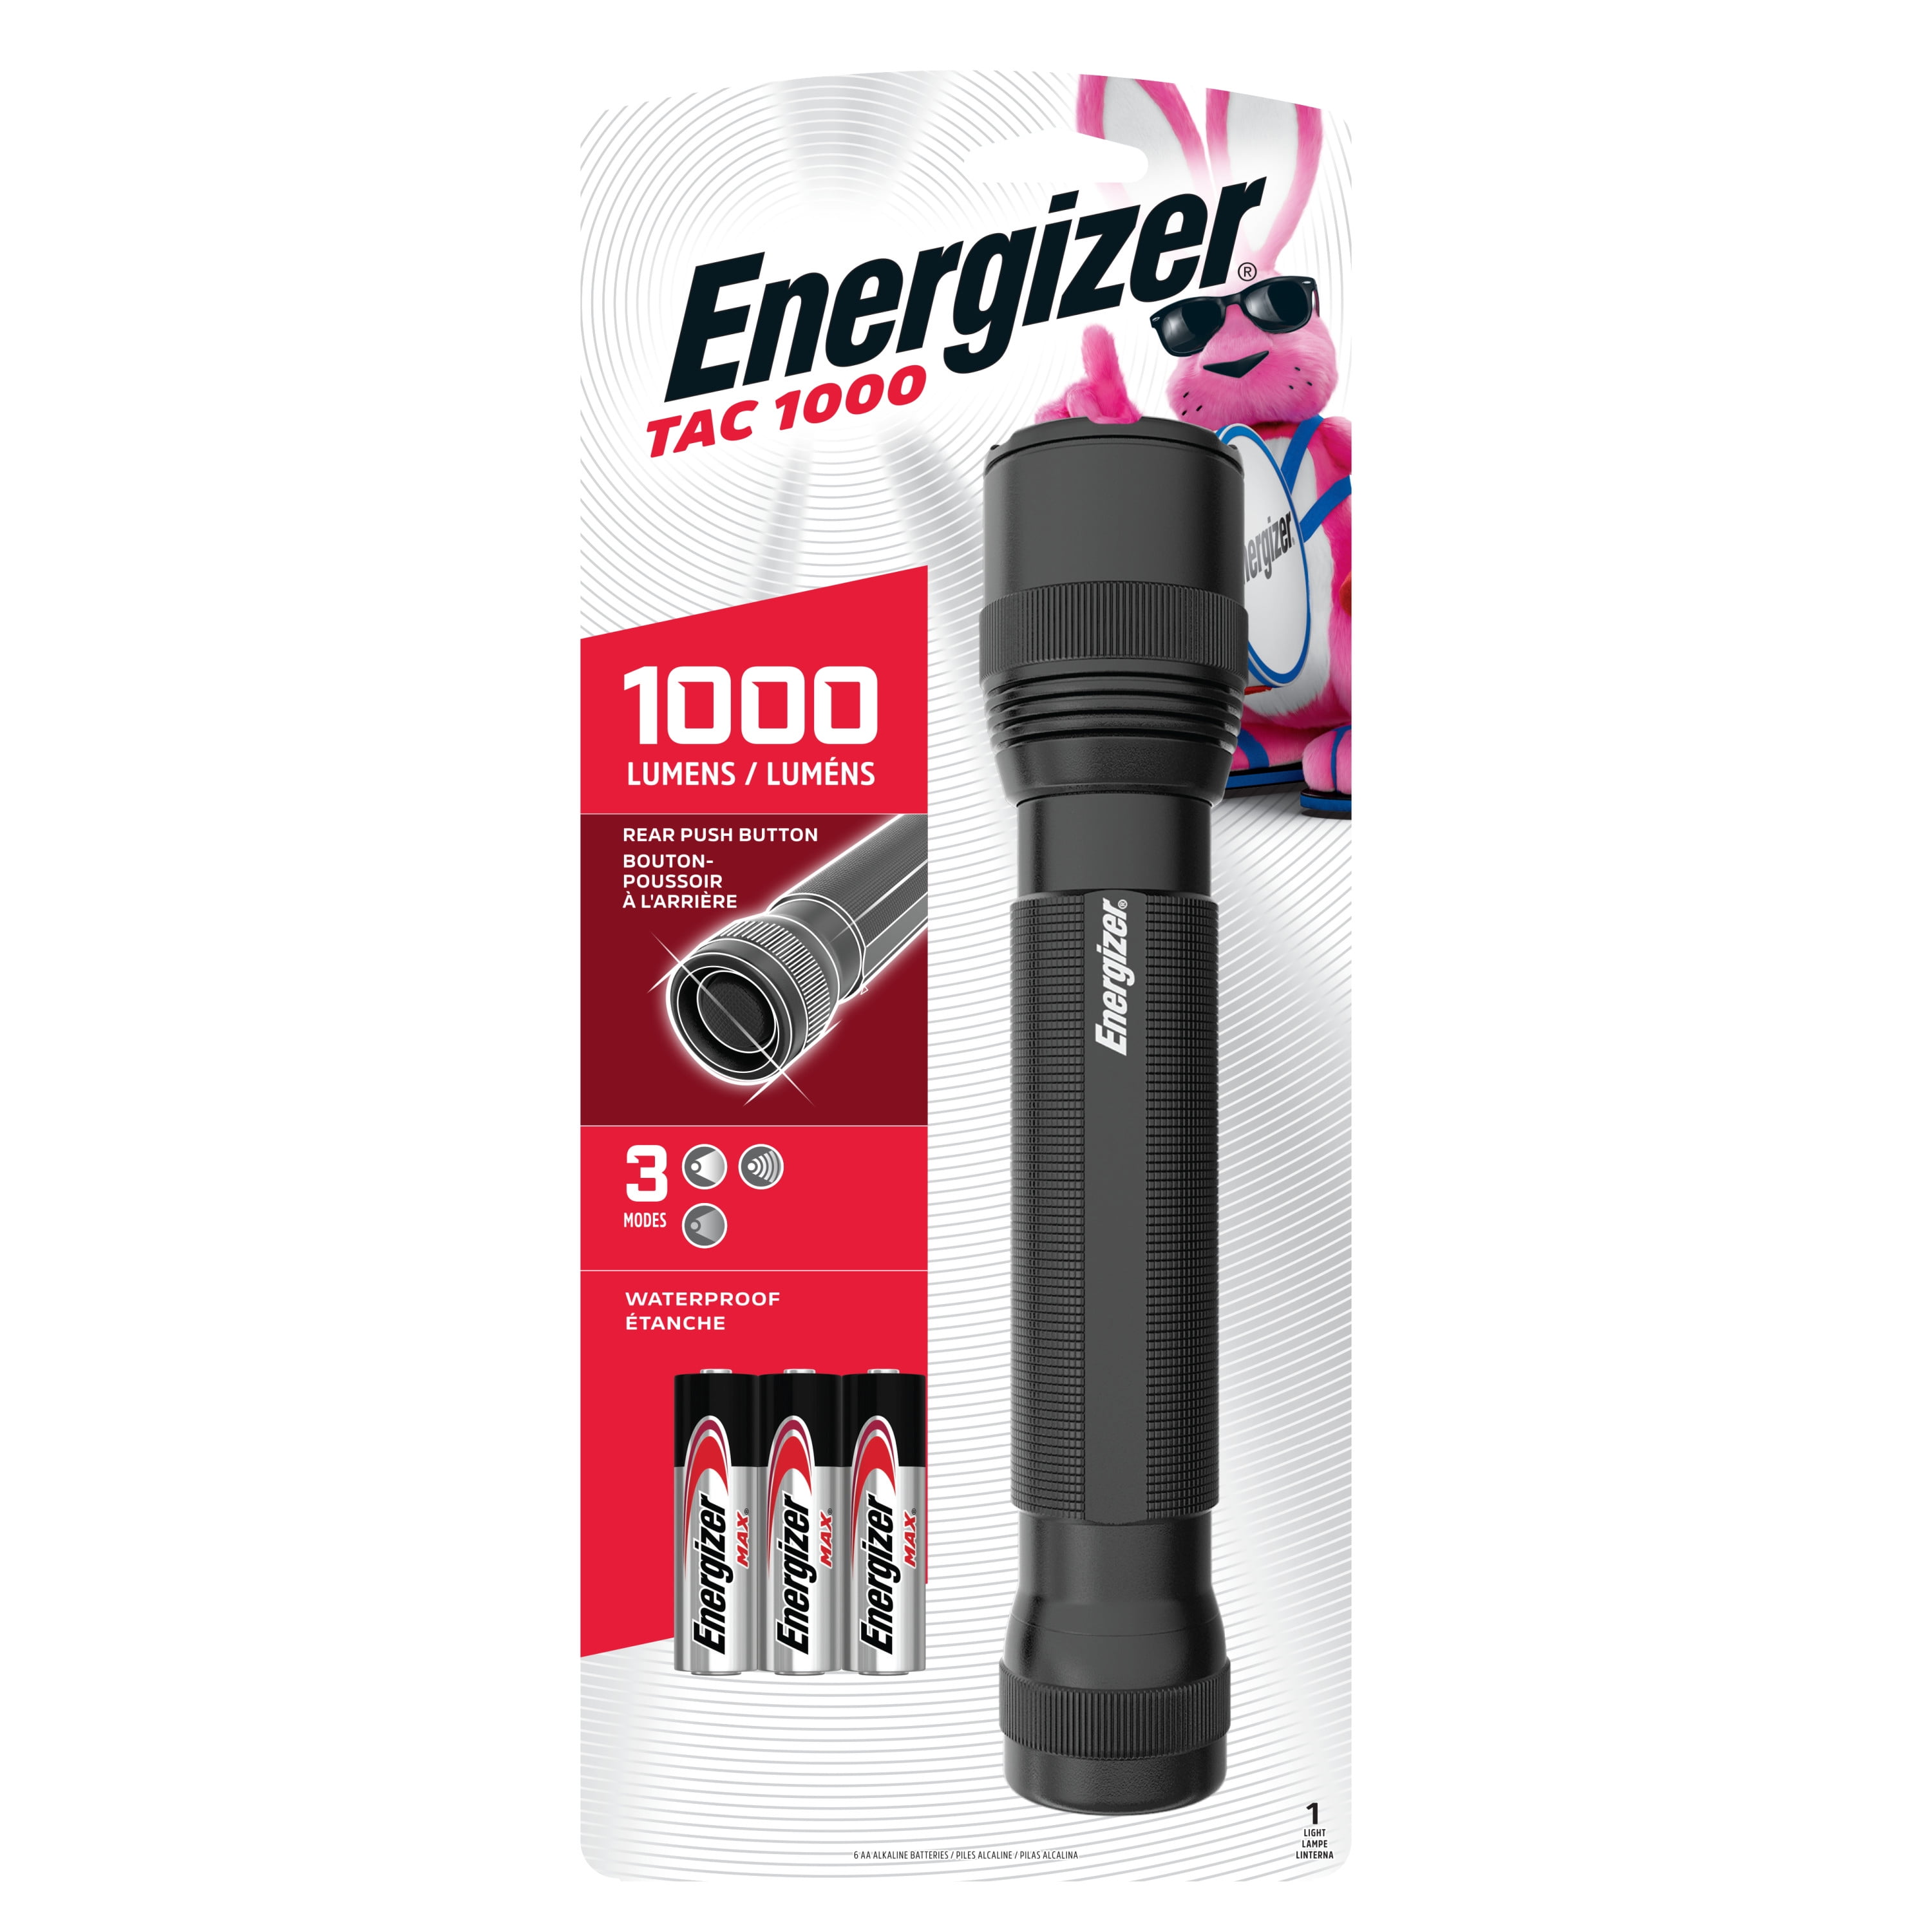  Energizer TacR-1000 LED Tactical Flashlight, Bright  Rechargeable Flashlight for Emergencies and Camping Gear, Water Resistant  Flashlight, USB Included, Pack of 1, Black : Tools & Home Improvement